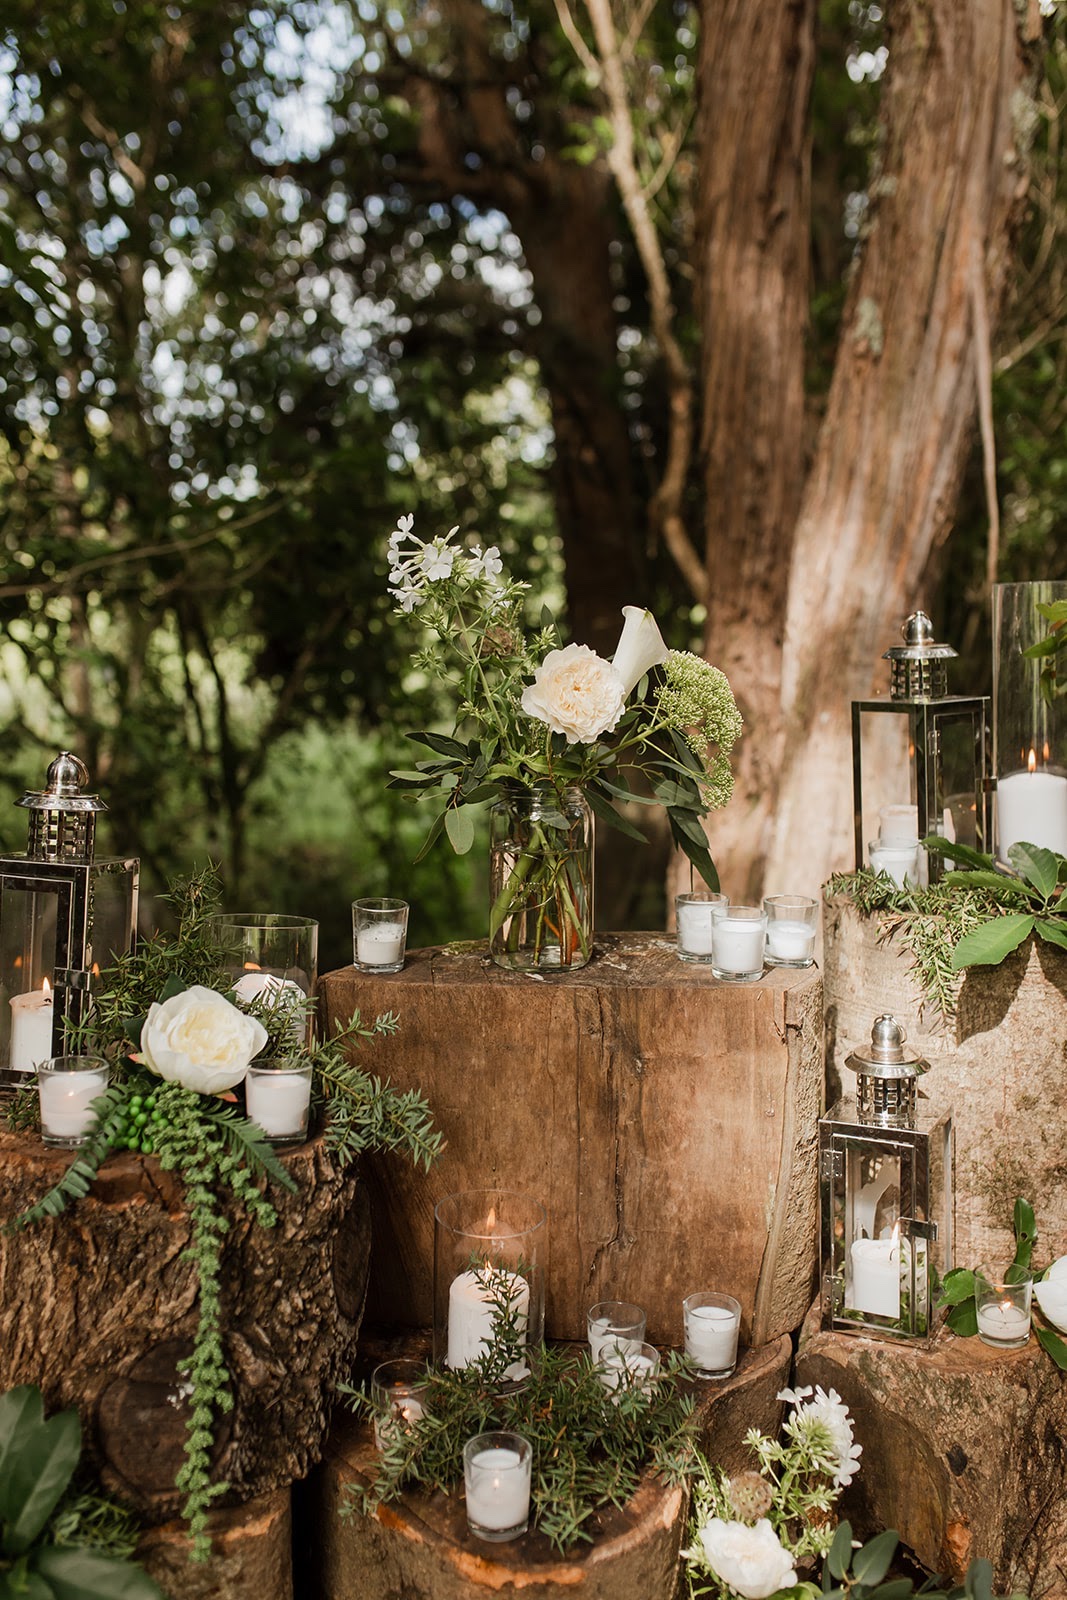 FOREST-AISLE-SET-UP-CANDLES-ON-TREE-STUMPS